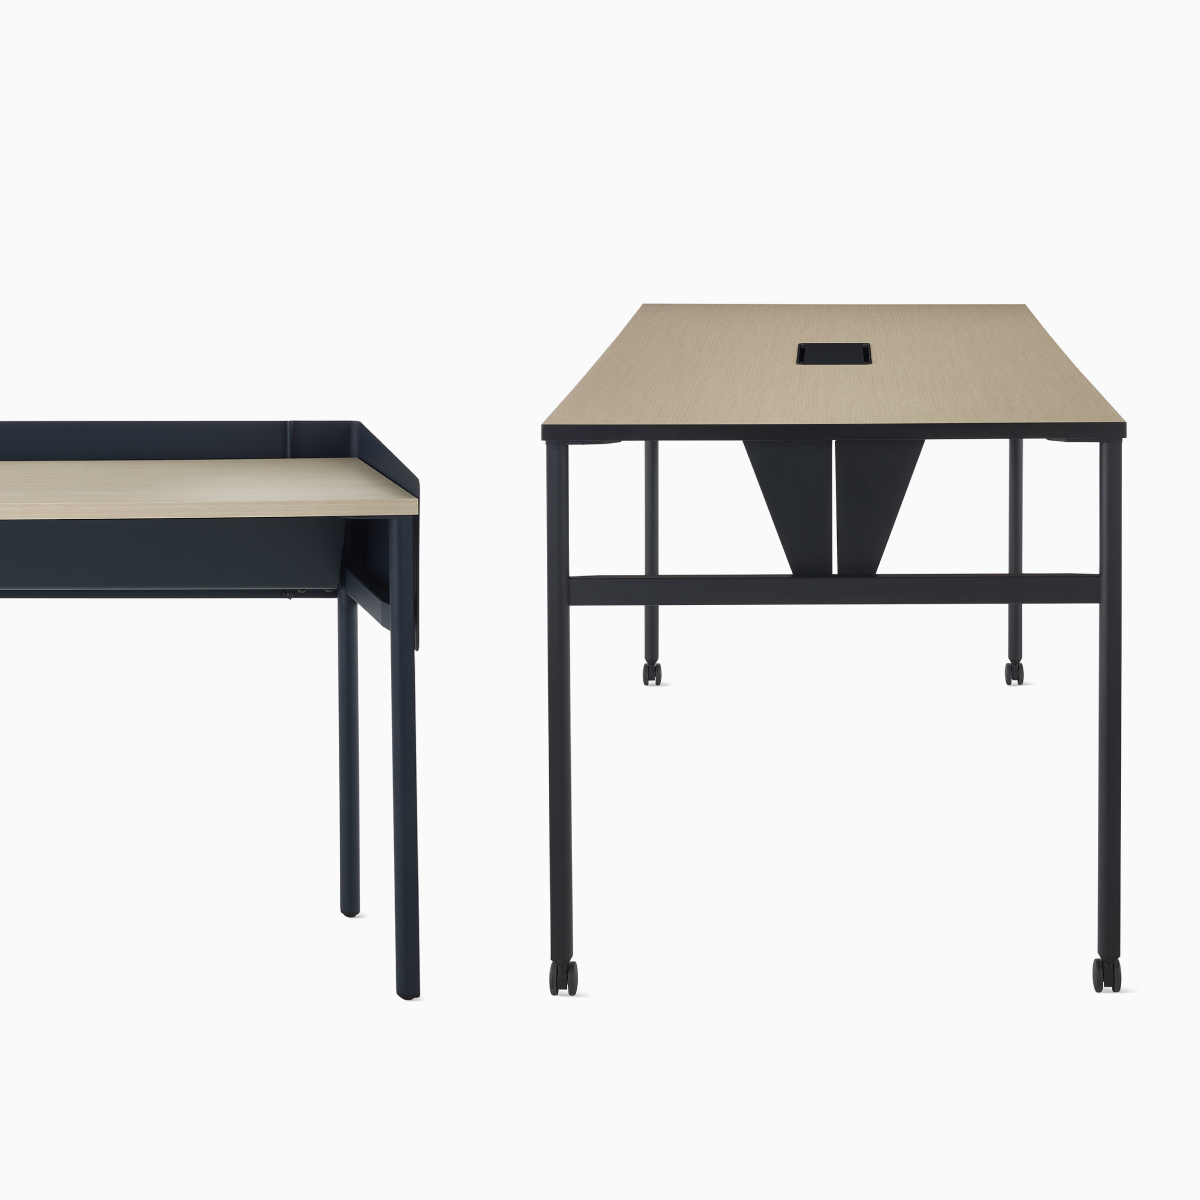 A black double sided OE1 Communal Table with a brown surface and casters with a dark blue single sided OE1 Communal Table with light brown surface and glides.